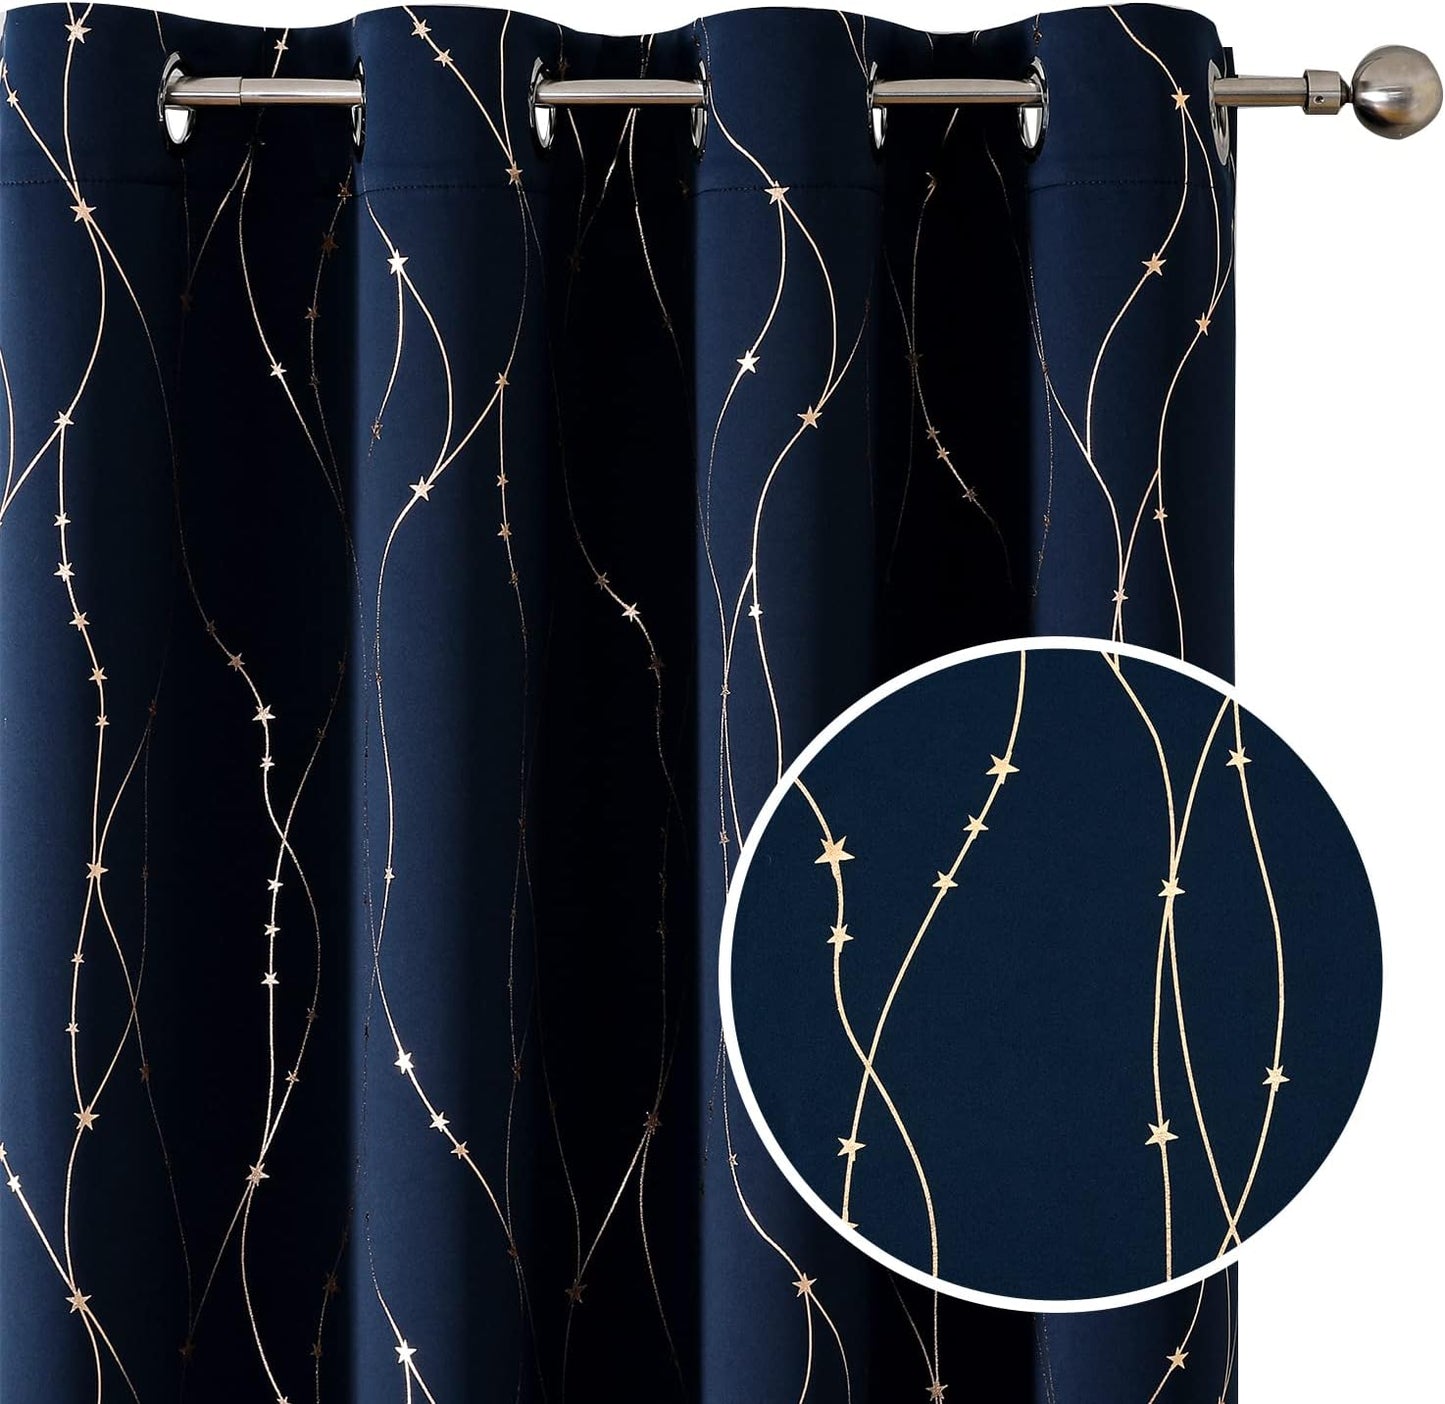 SMILE WEAVER Black Blackout Curtains for Bedroom 72 Inch Long 2 Panels,Room Darkening Curtain with Gold Print Design Noise Reducing Thermal Insulated Window Treatment Drapes for Living Room  SMILE WEAVER Navy Blue Gold 52Wx63L 